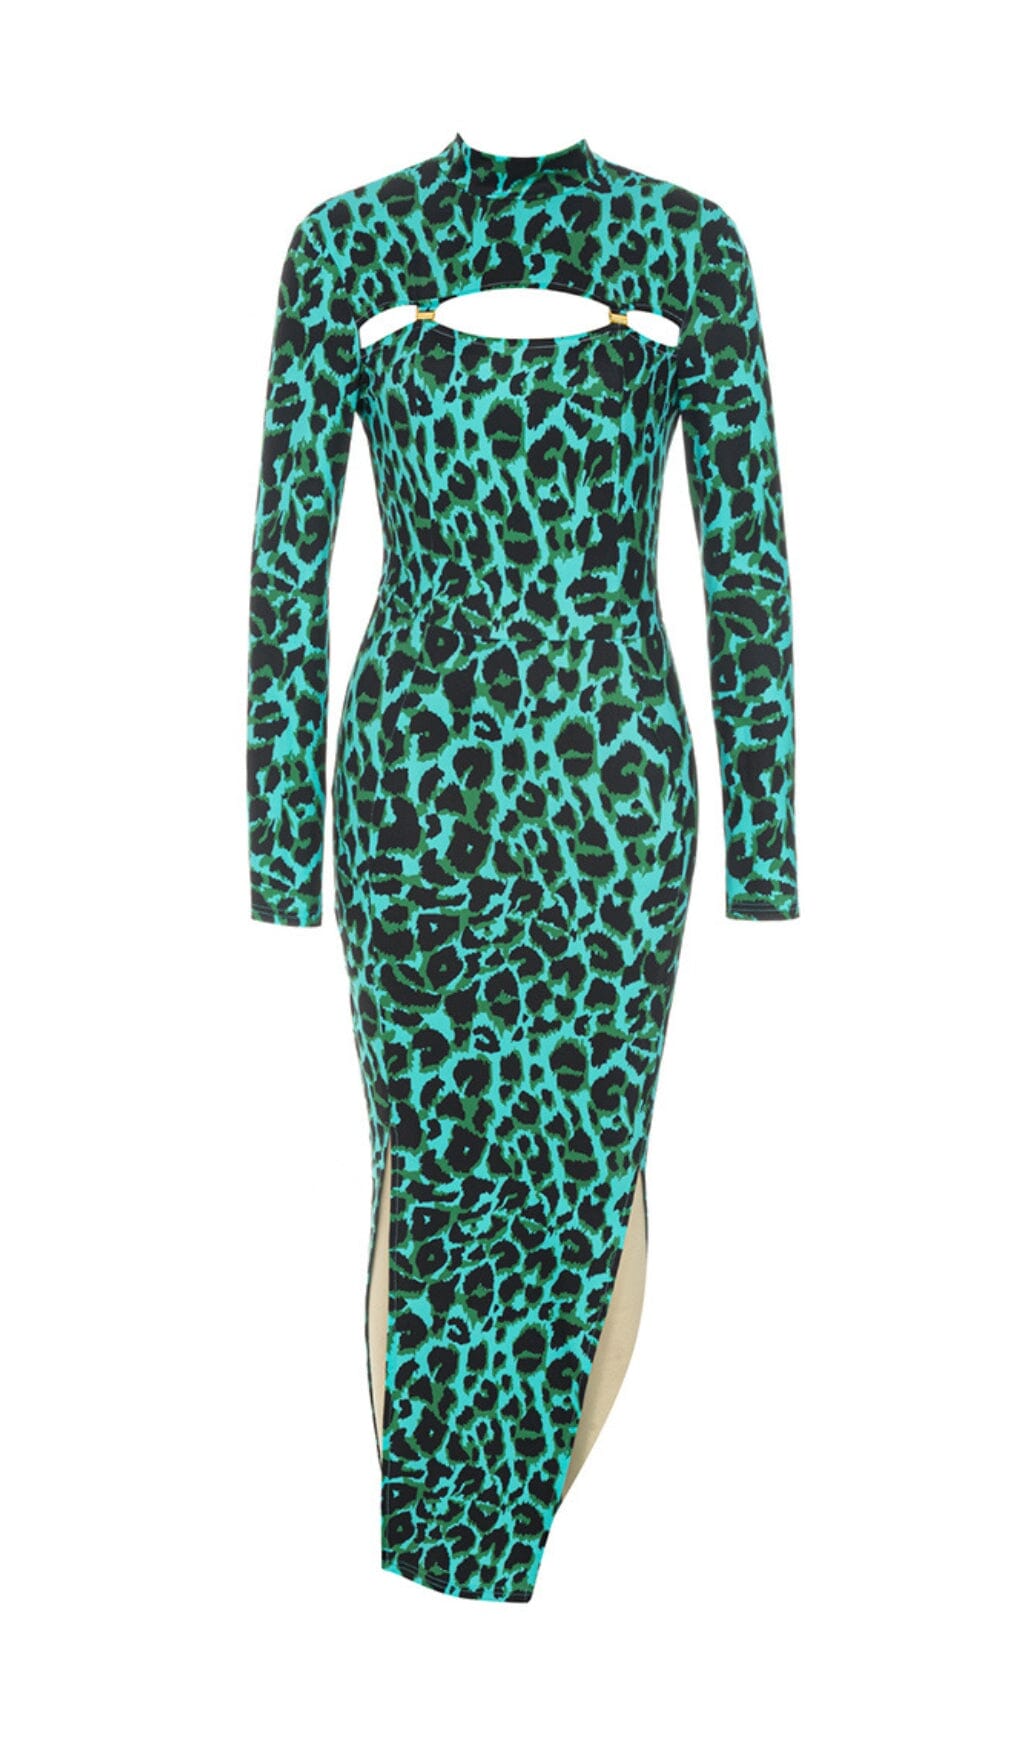 LEOPARD PRINT HOLLOW OUT MIDI DRESS IN CAMOUFLAGE